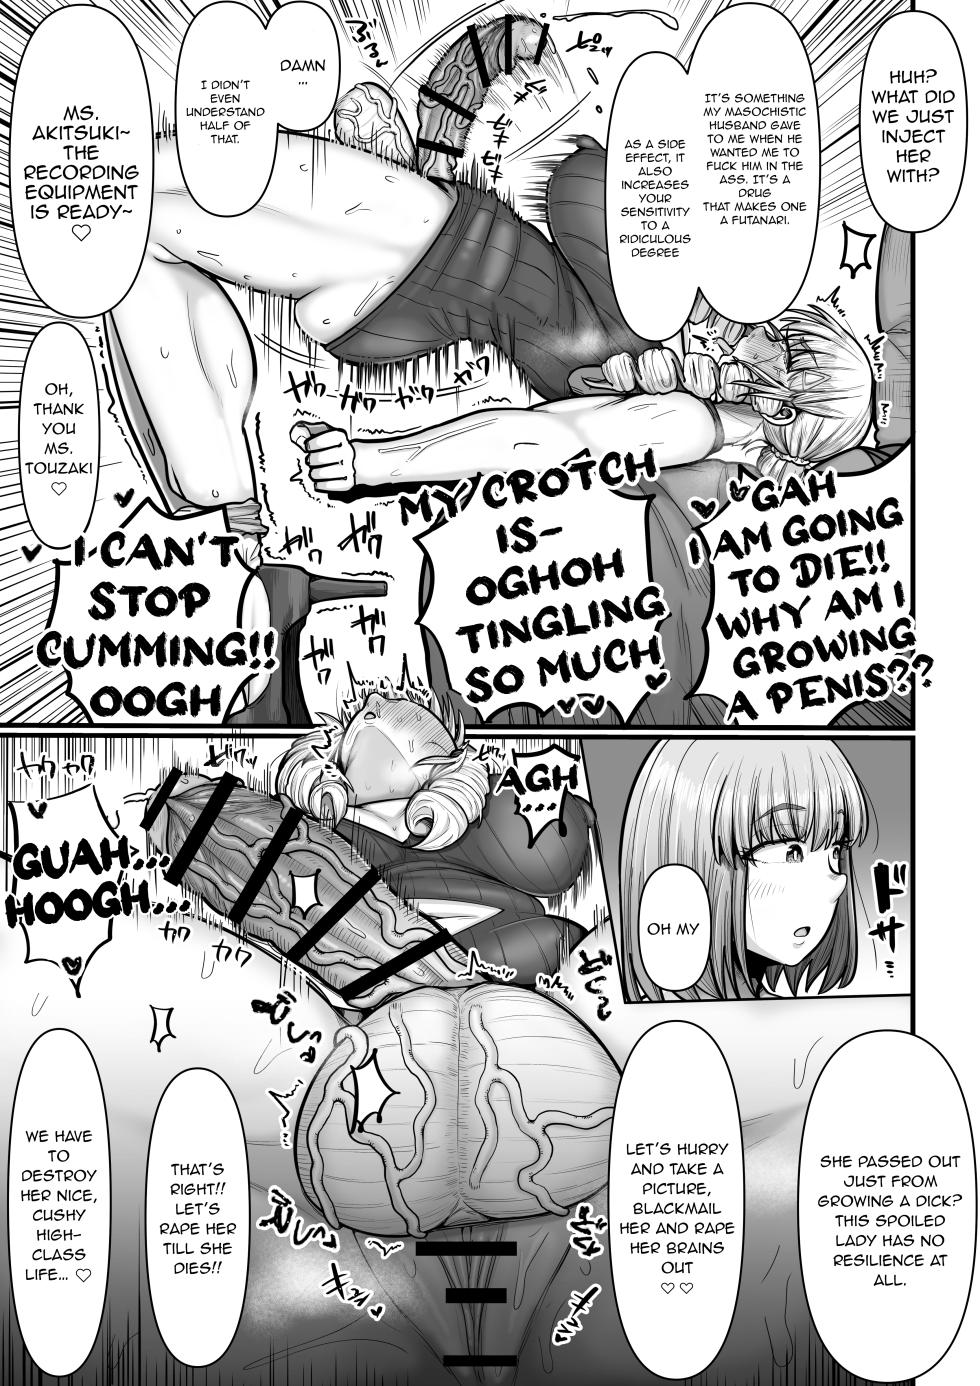 [Ebi no Implant (Shrimp Cake)](New Futanari Ojou-sama Tenant Just Moved In) Suburban Mansion Looking For Tenants [Fully Equipped With Futanari Meat Toilet] {EL JEFE Hentai Truck} - Page 13